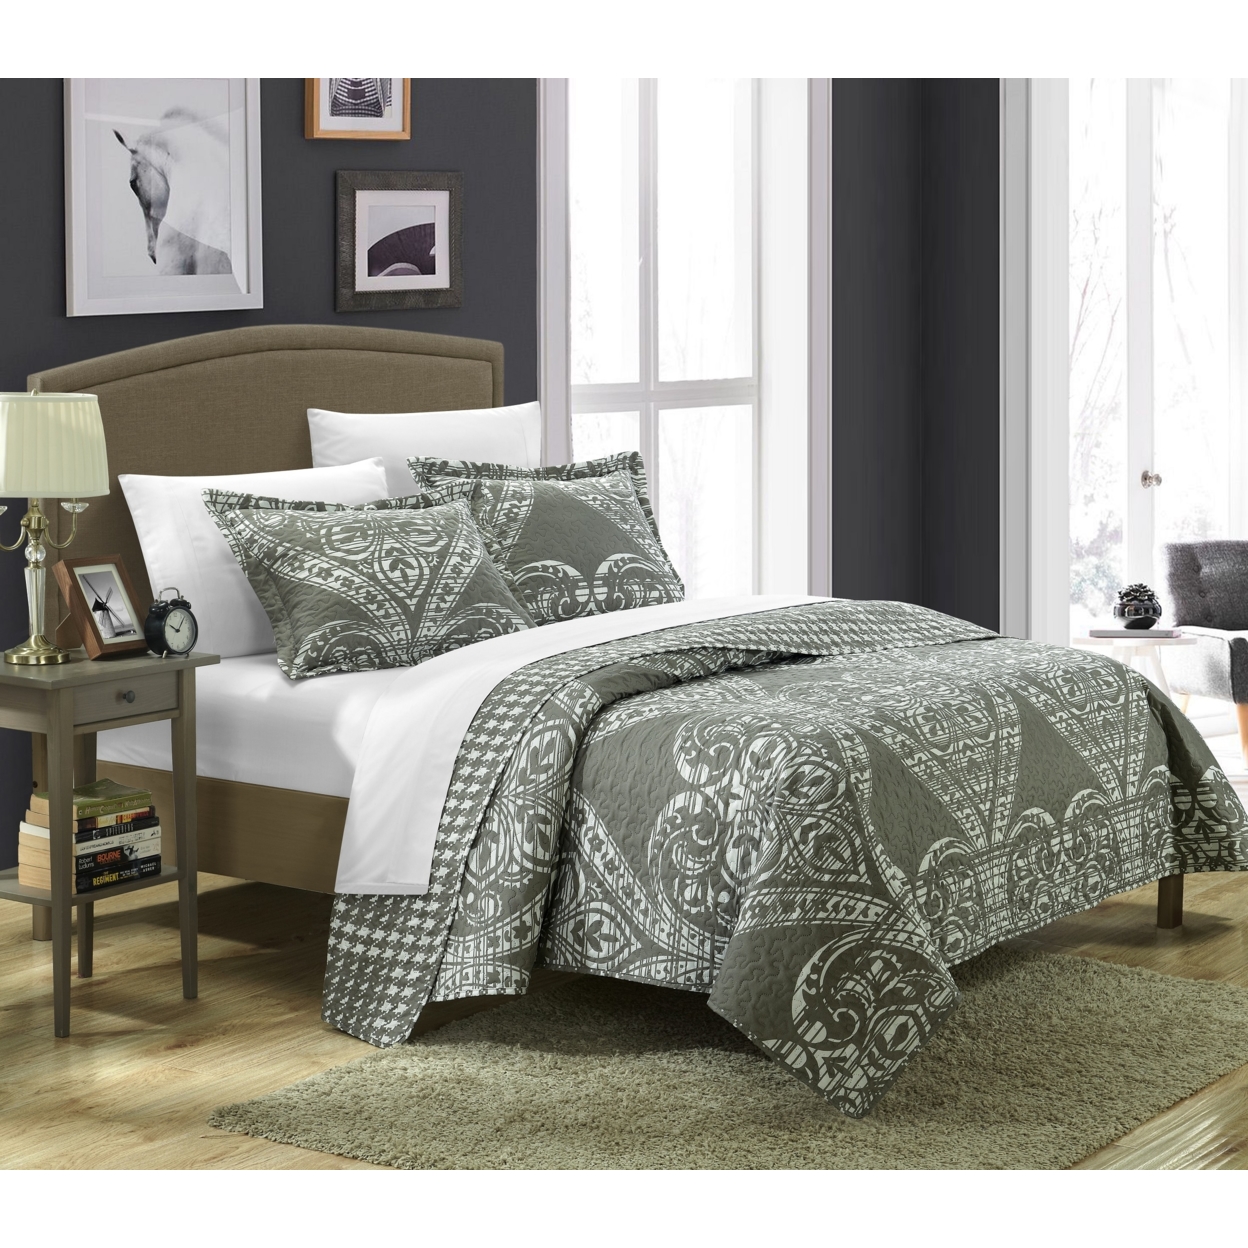 3 Or 2 Piece Revenna REVERSIBLE Printed Quilt Set. Front A Traditional Pattern And Reverses Into A Houndstooth Pattern - Beige, Twin